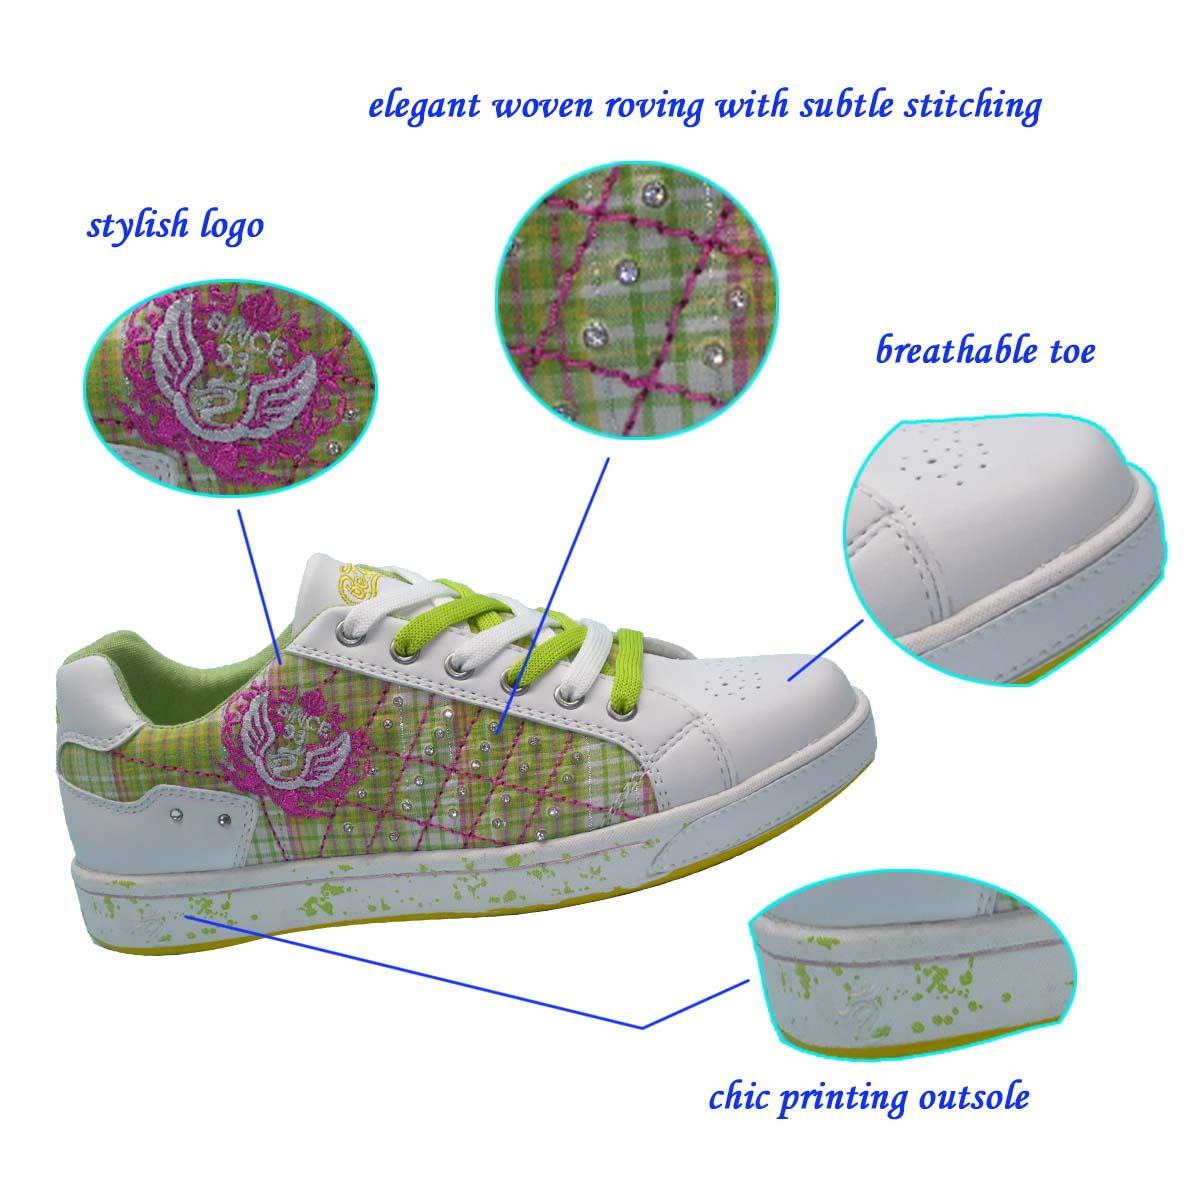 Top Selling Fashionable Woman's Green Skate Shoes with Smart Crystal and Stylish Canvas Upper